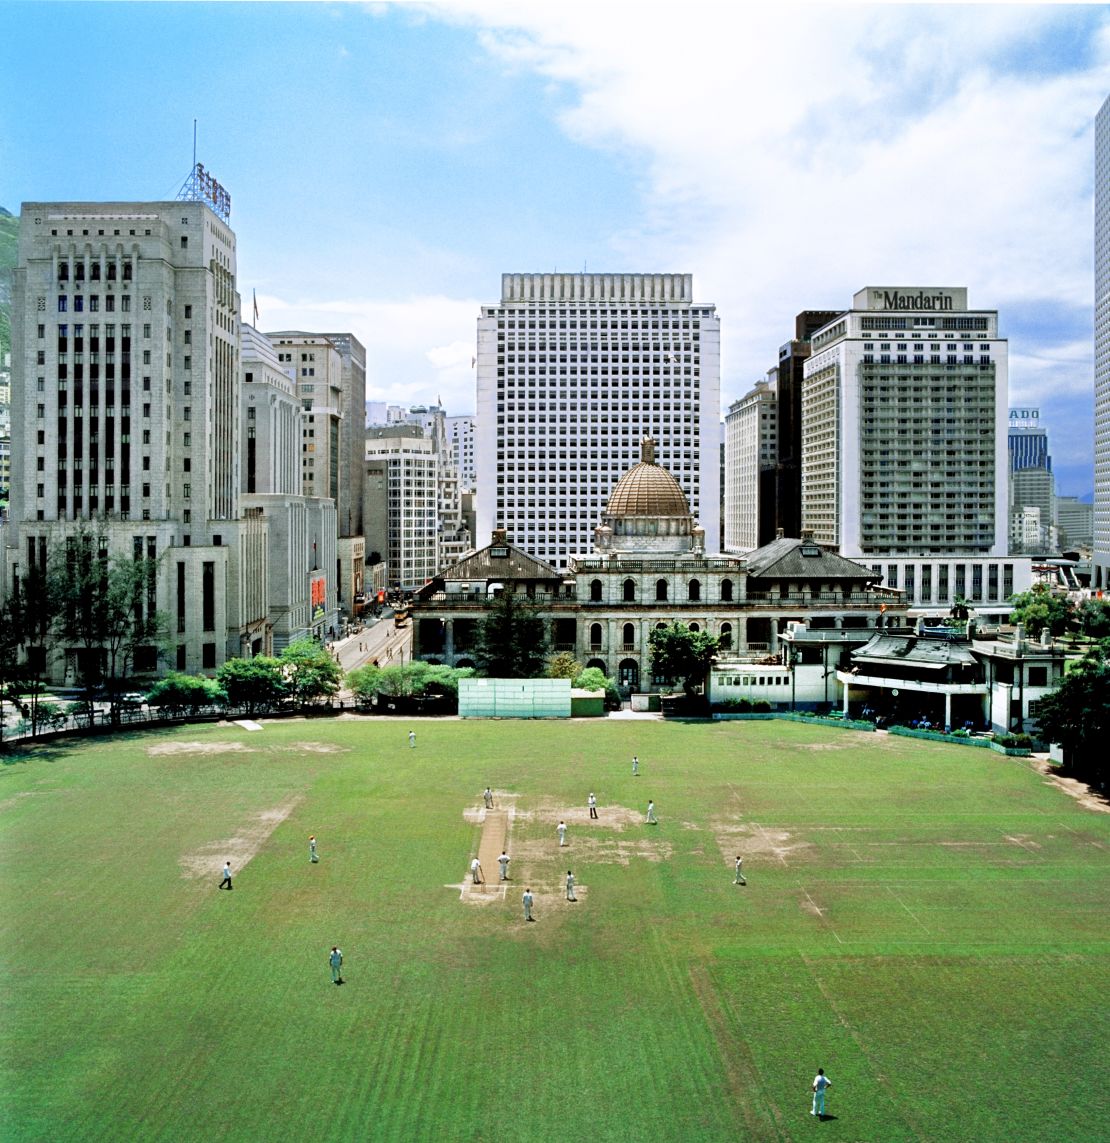 The last cricket match to be played on a large green in the city's center.